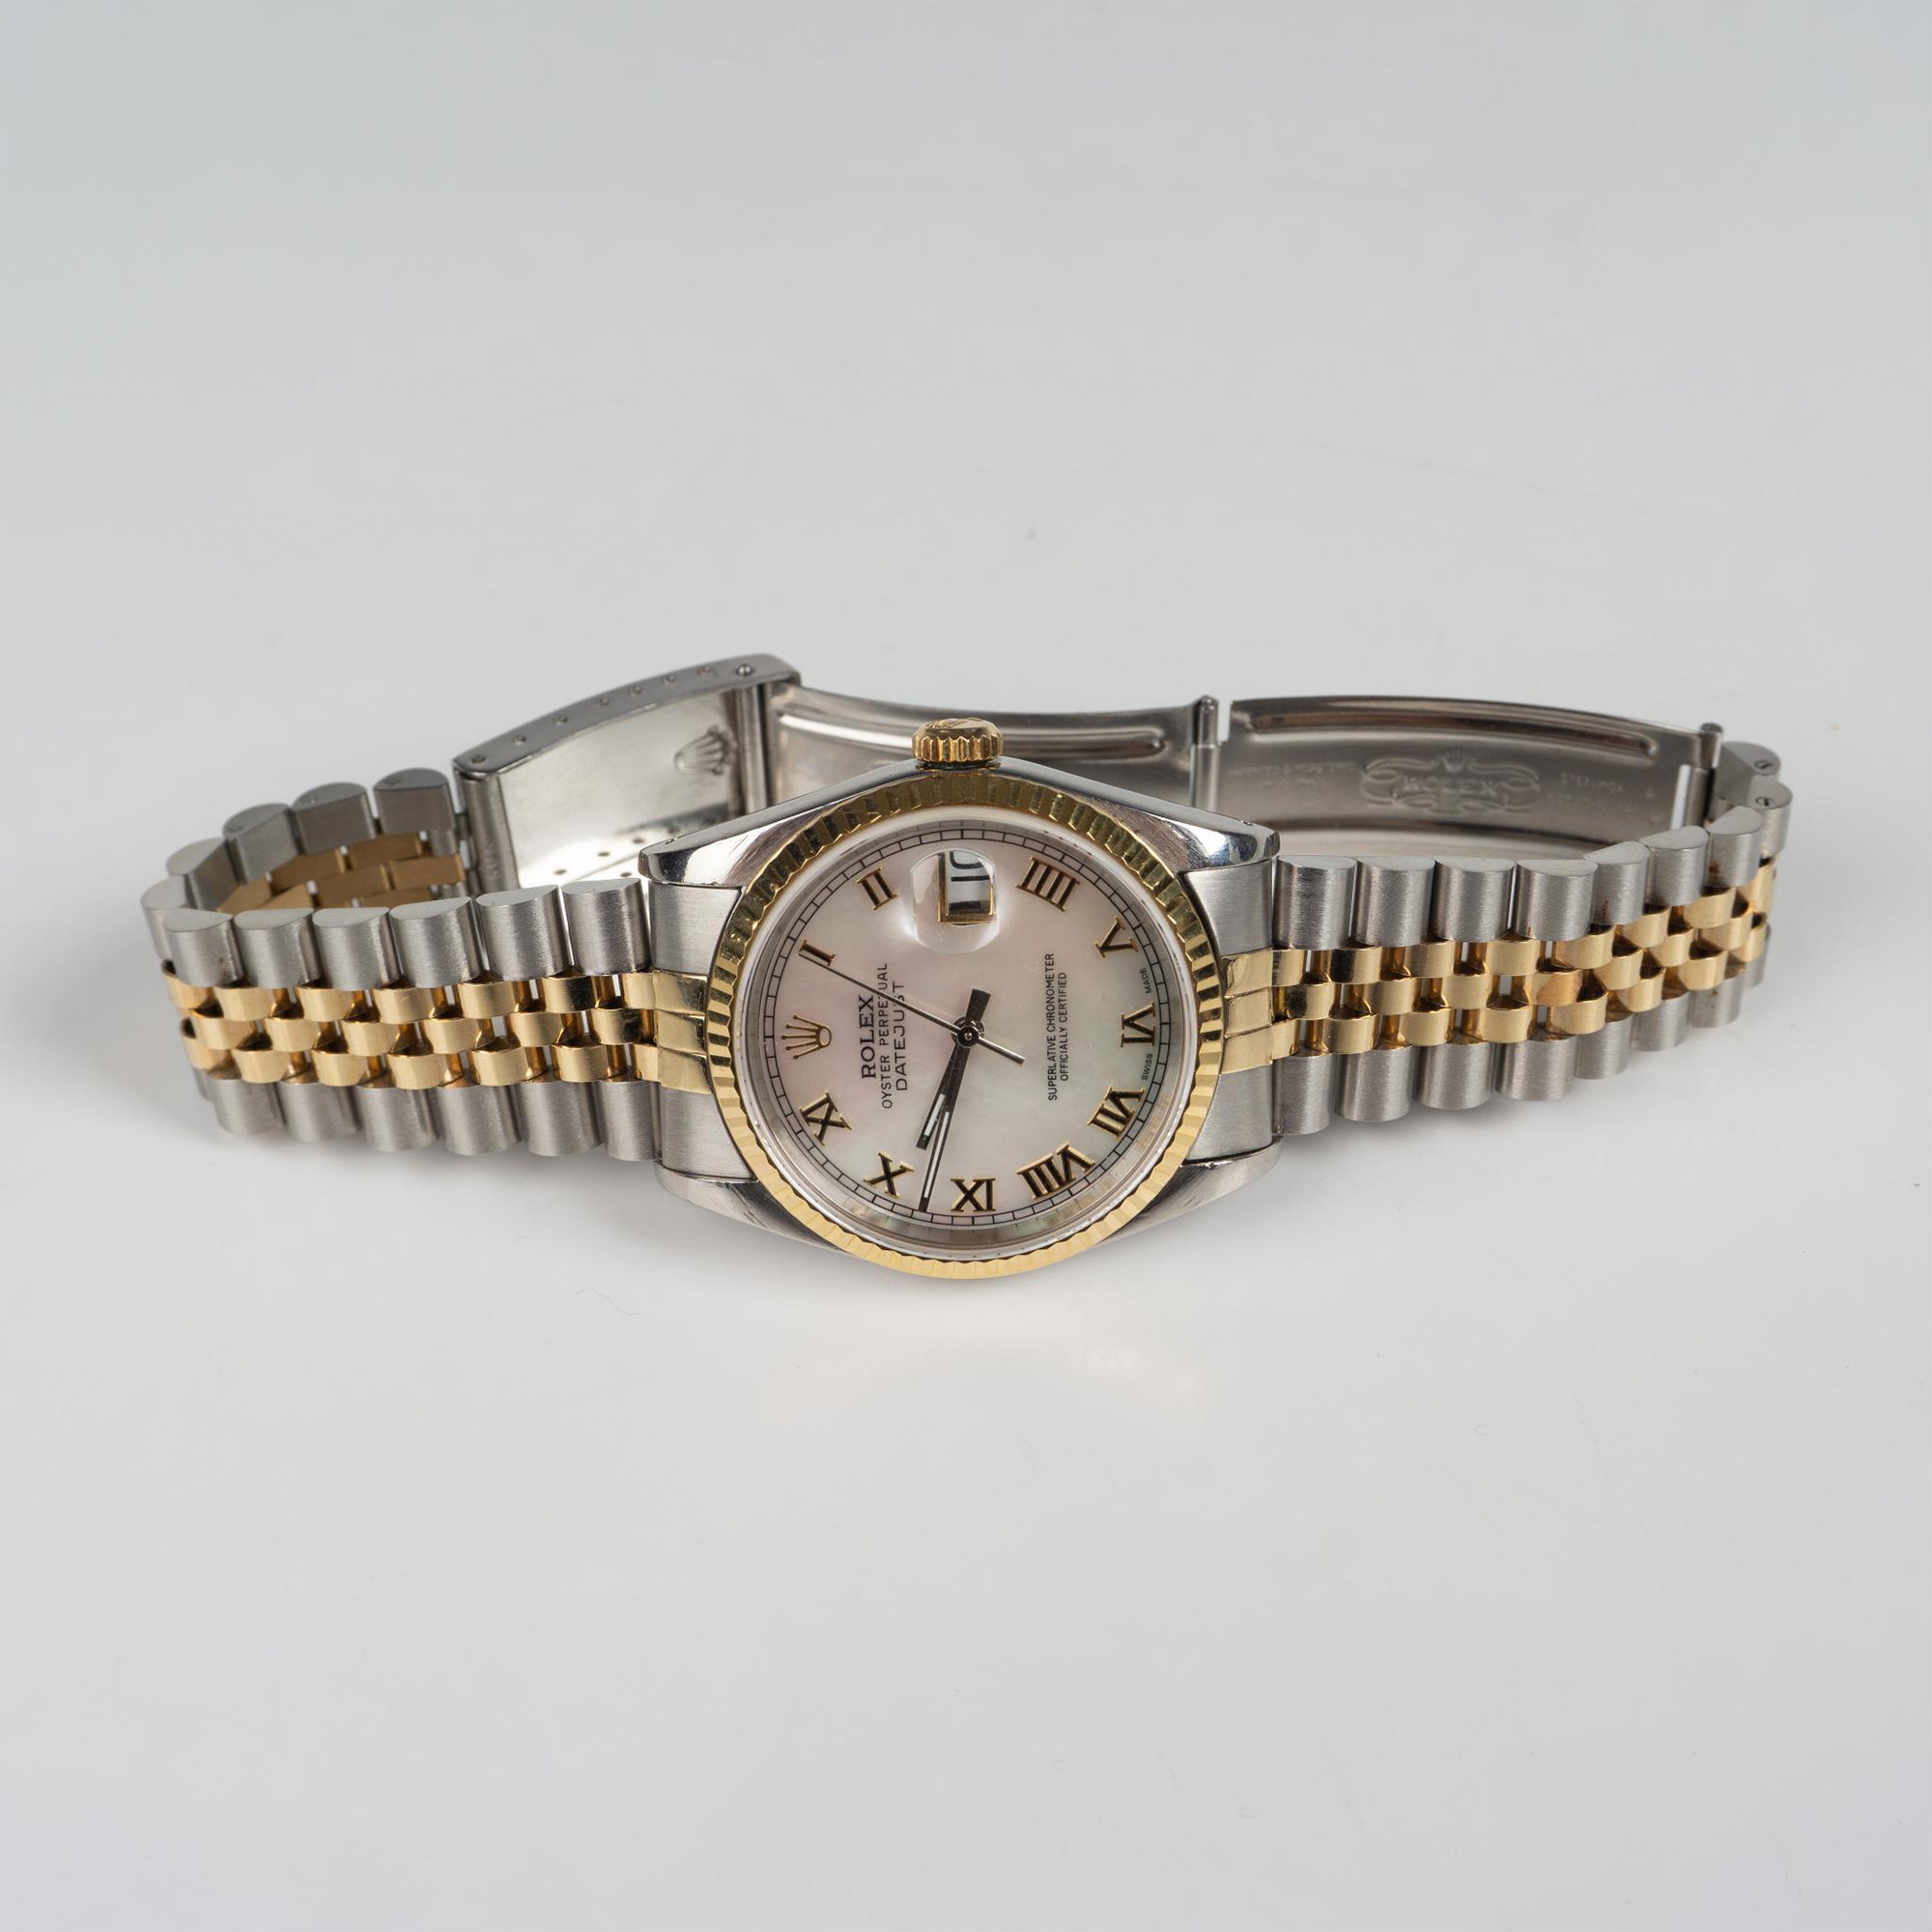 Rolex Datejust Oyster Perpetual 14K Gold Two-Tone Watch 16220 - Image 5 of 8